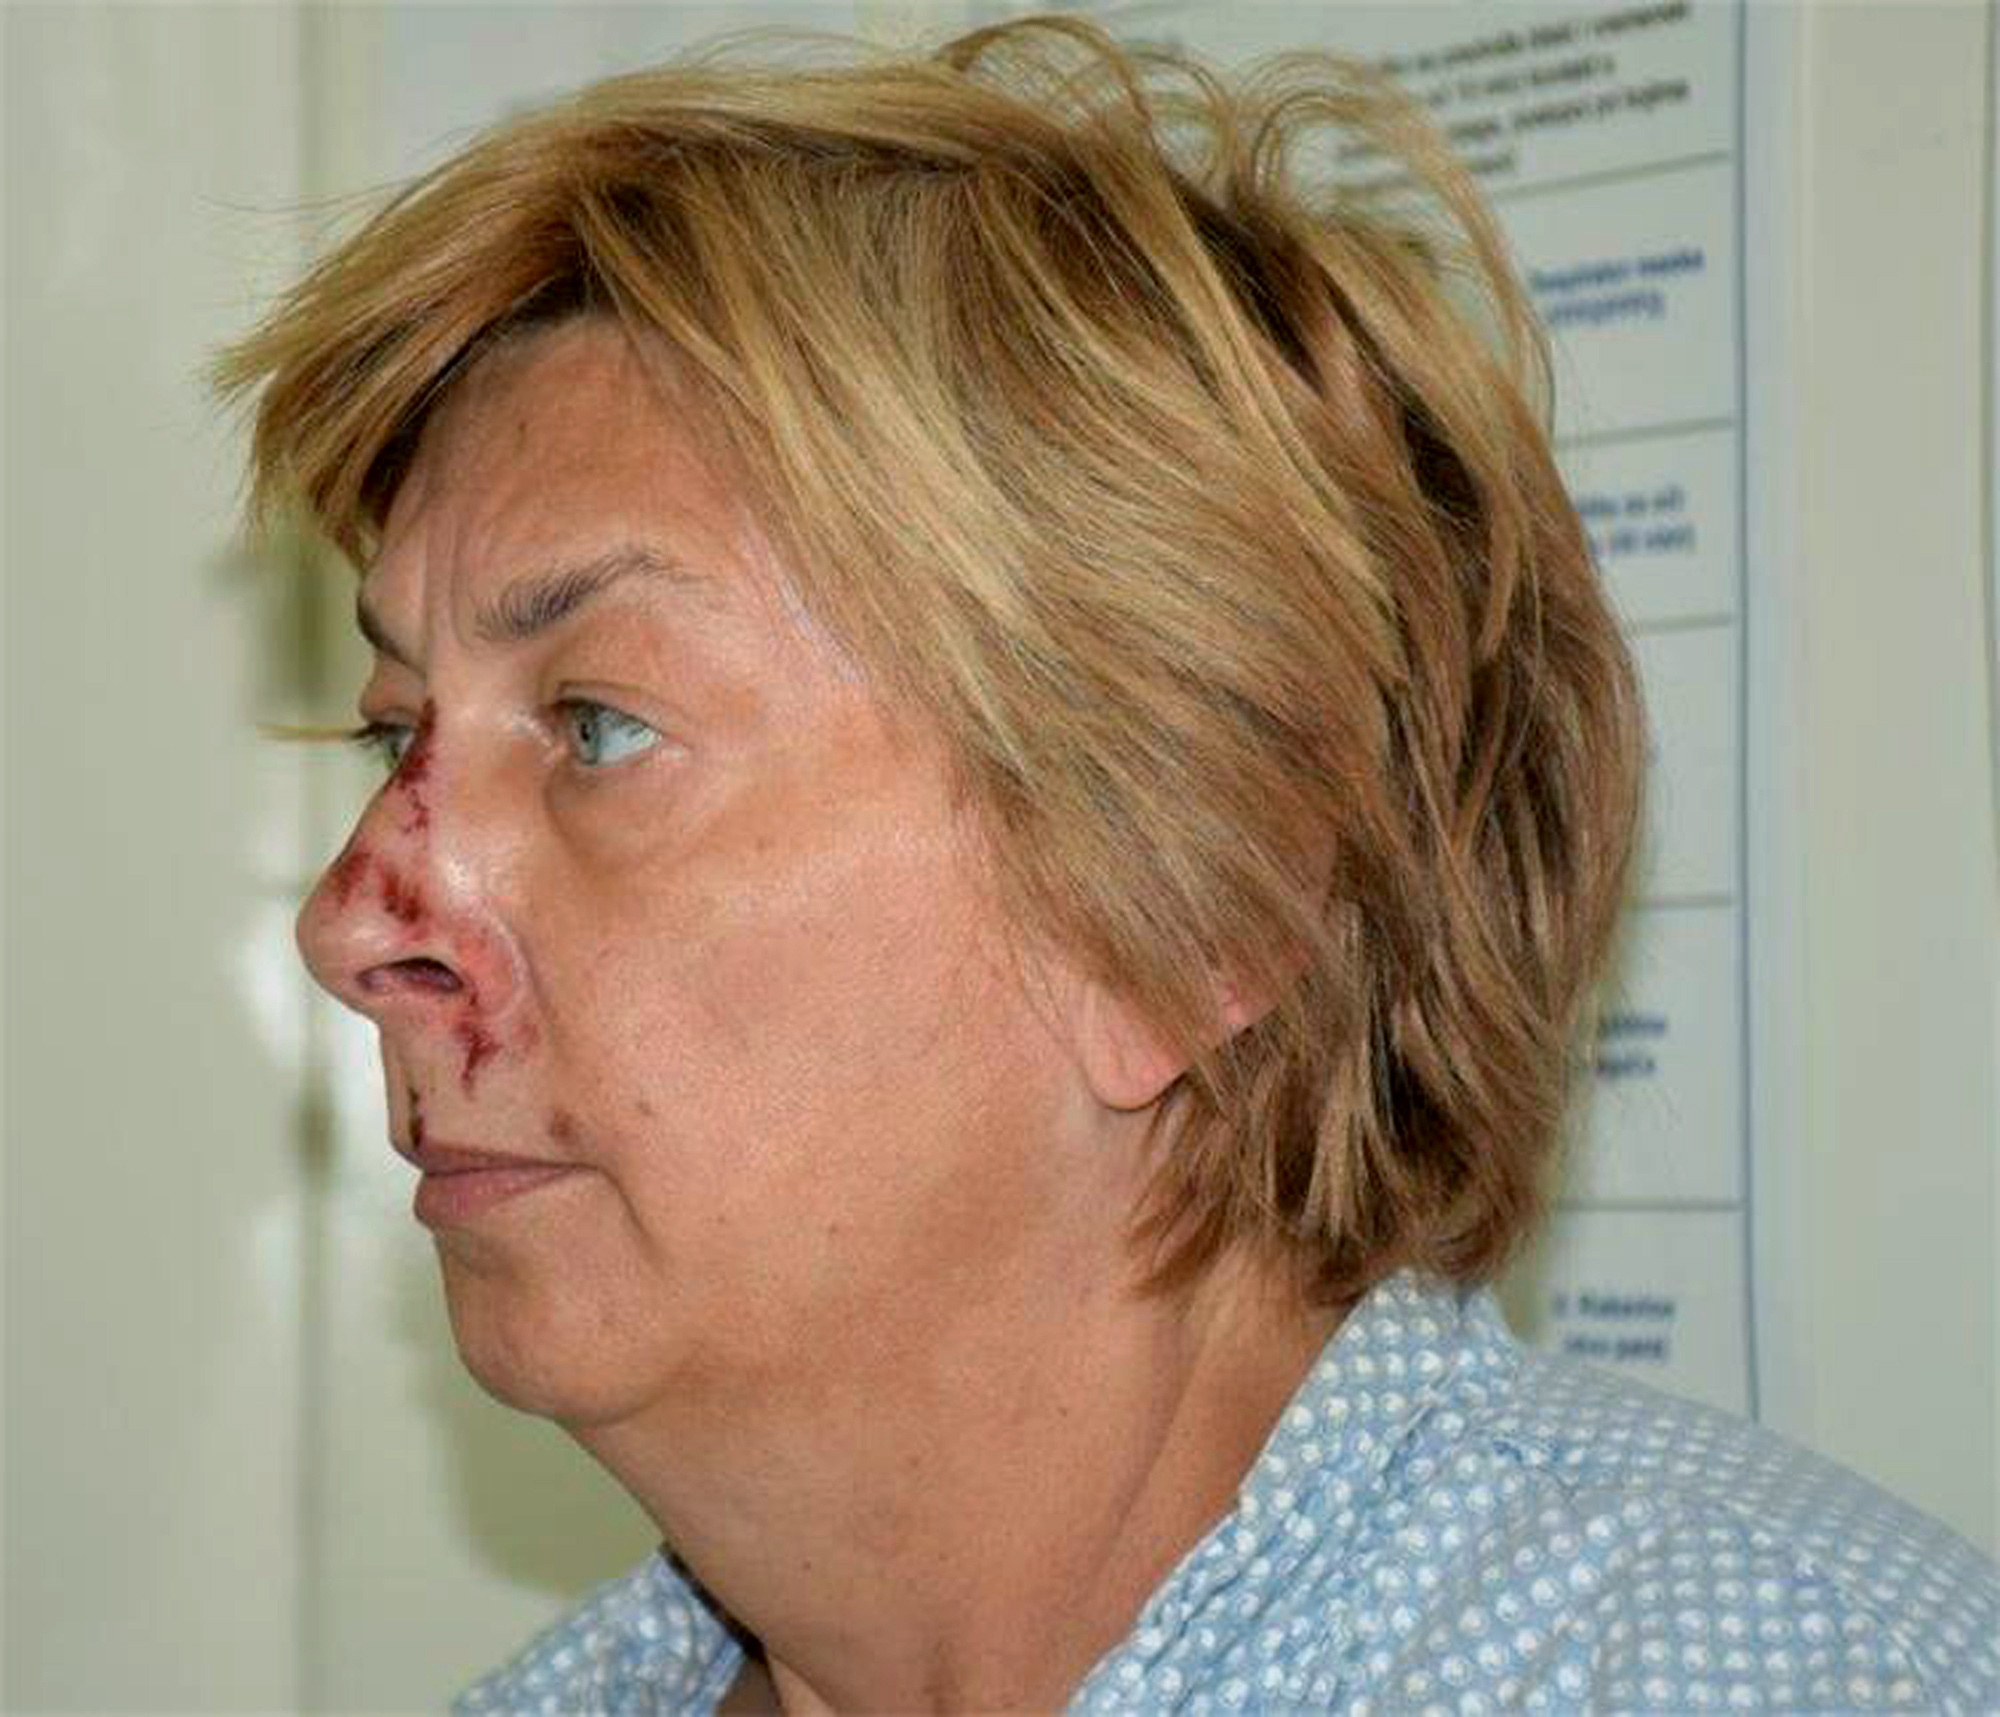 This undated photo provided by the Croatian Police shows an unidentified woman who was found on the Adriatic island of Krk on Sept. 12, 2021. Croatian police said Tuesday, Sept. 21, 2021 they are still working to establish the identity of a woman found over a week ago at a northern Adriatic Sea island with no recollection of who she is or where she came from. Police told the Associated Press they are searching the terrain and conducting numerous interviews with residents and tourists or anyone who has information about the woman discovered on the island of Krk on Sept. 12. (Croatian Police via AP)